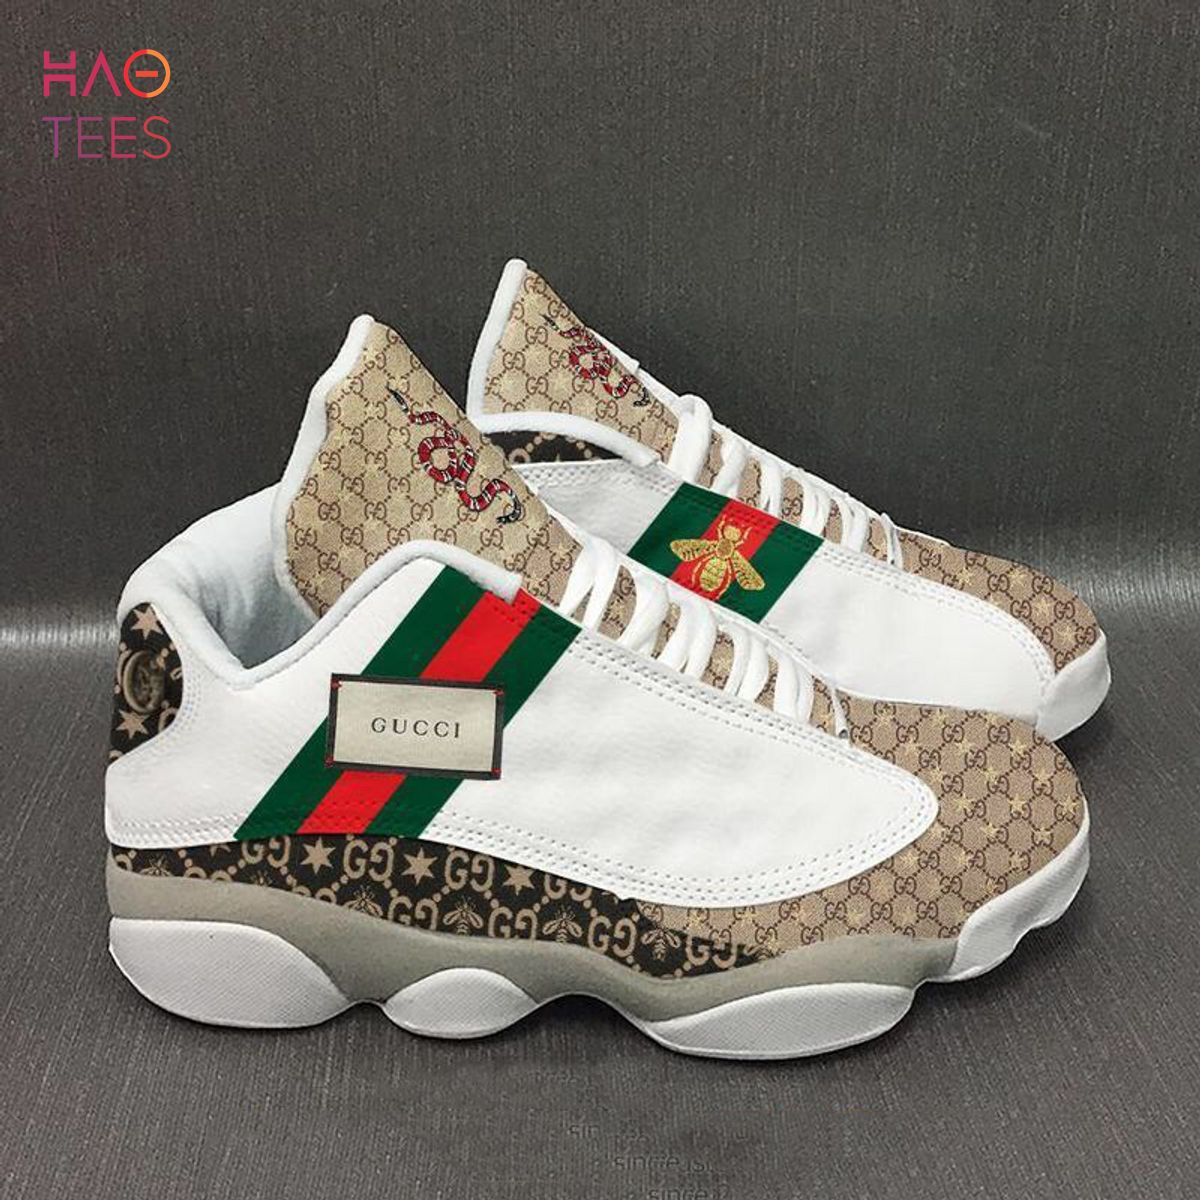 Gucci Bee Snake Air Jordan 13 Sneakers Shoes Gucci Gifts For Men